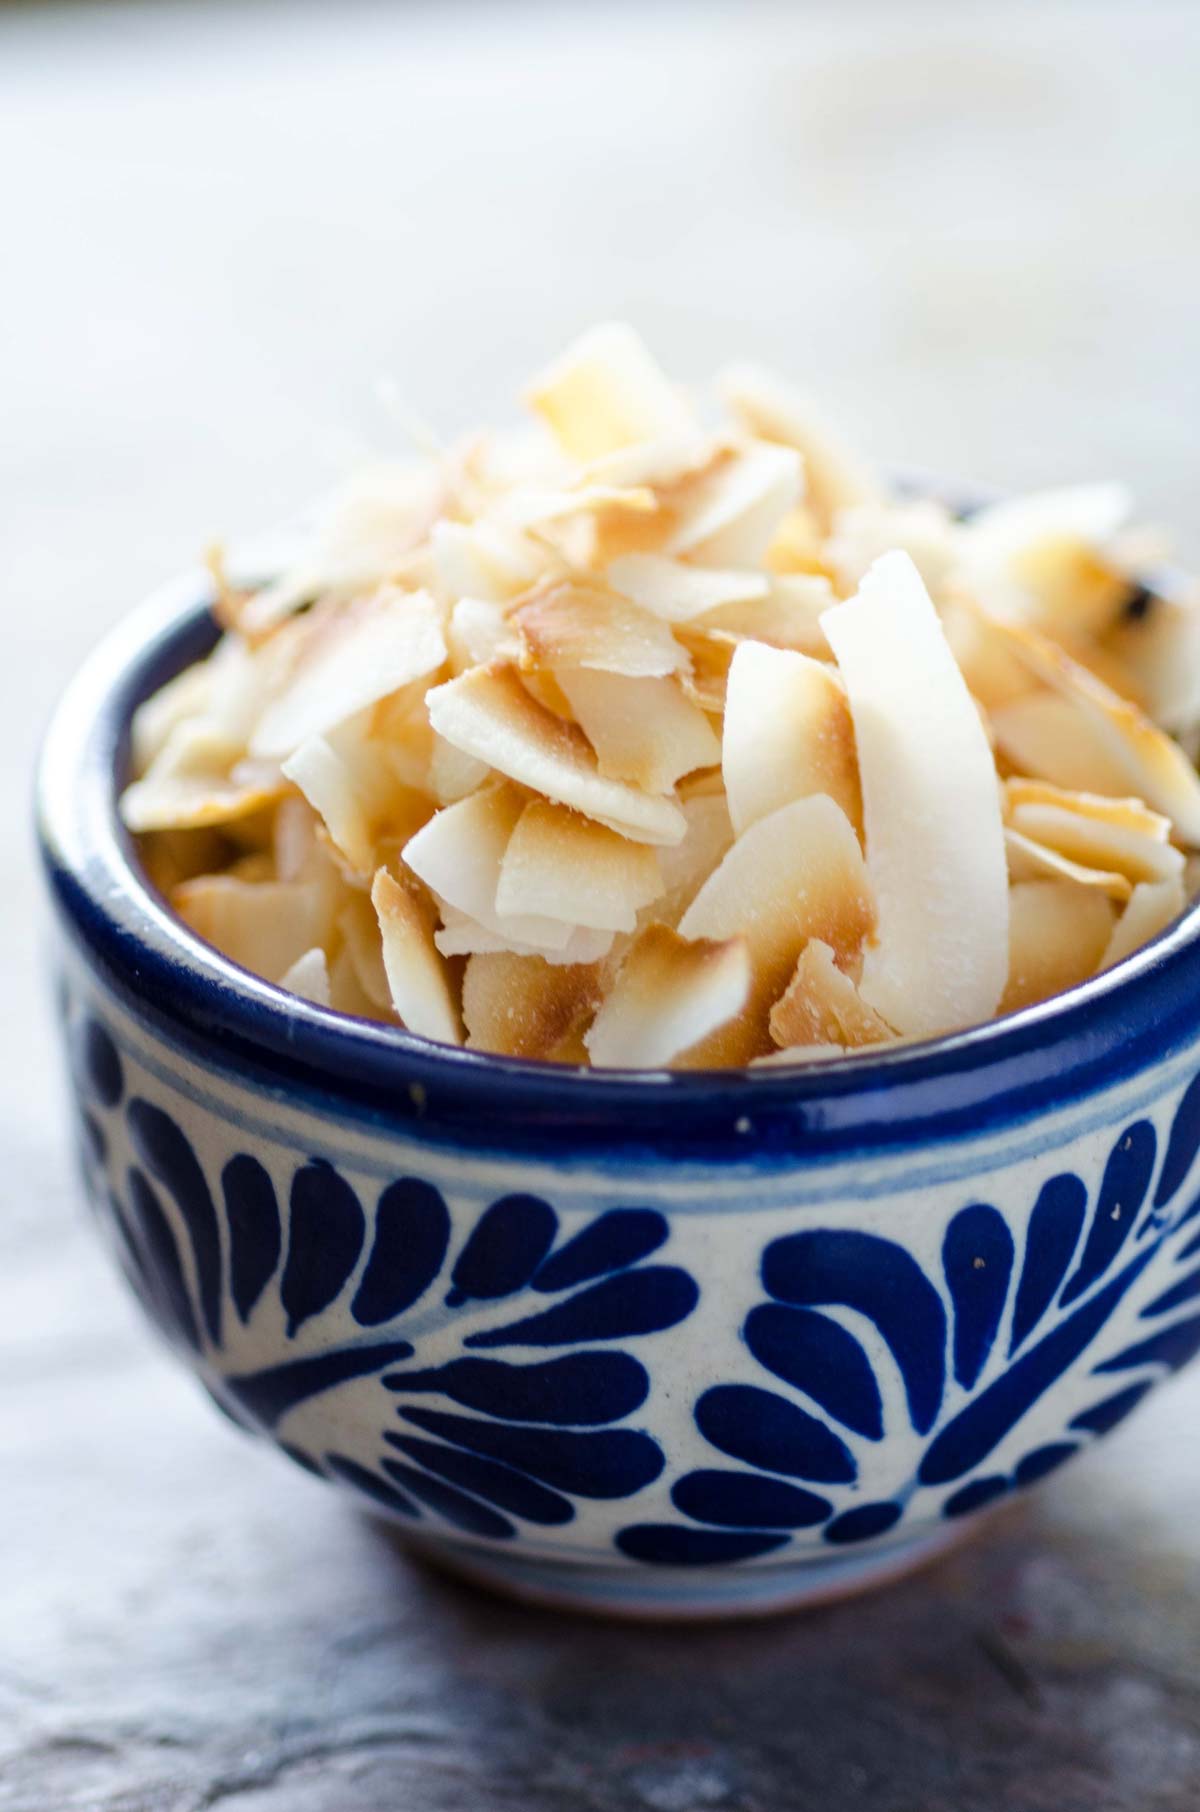 Toasted coconut flakes in a small blue and white patterned bowl.